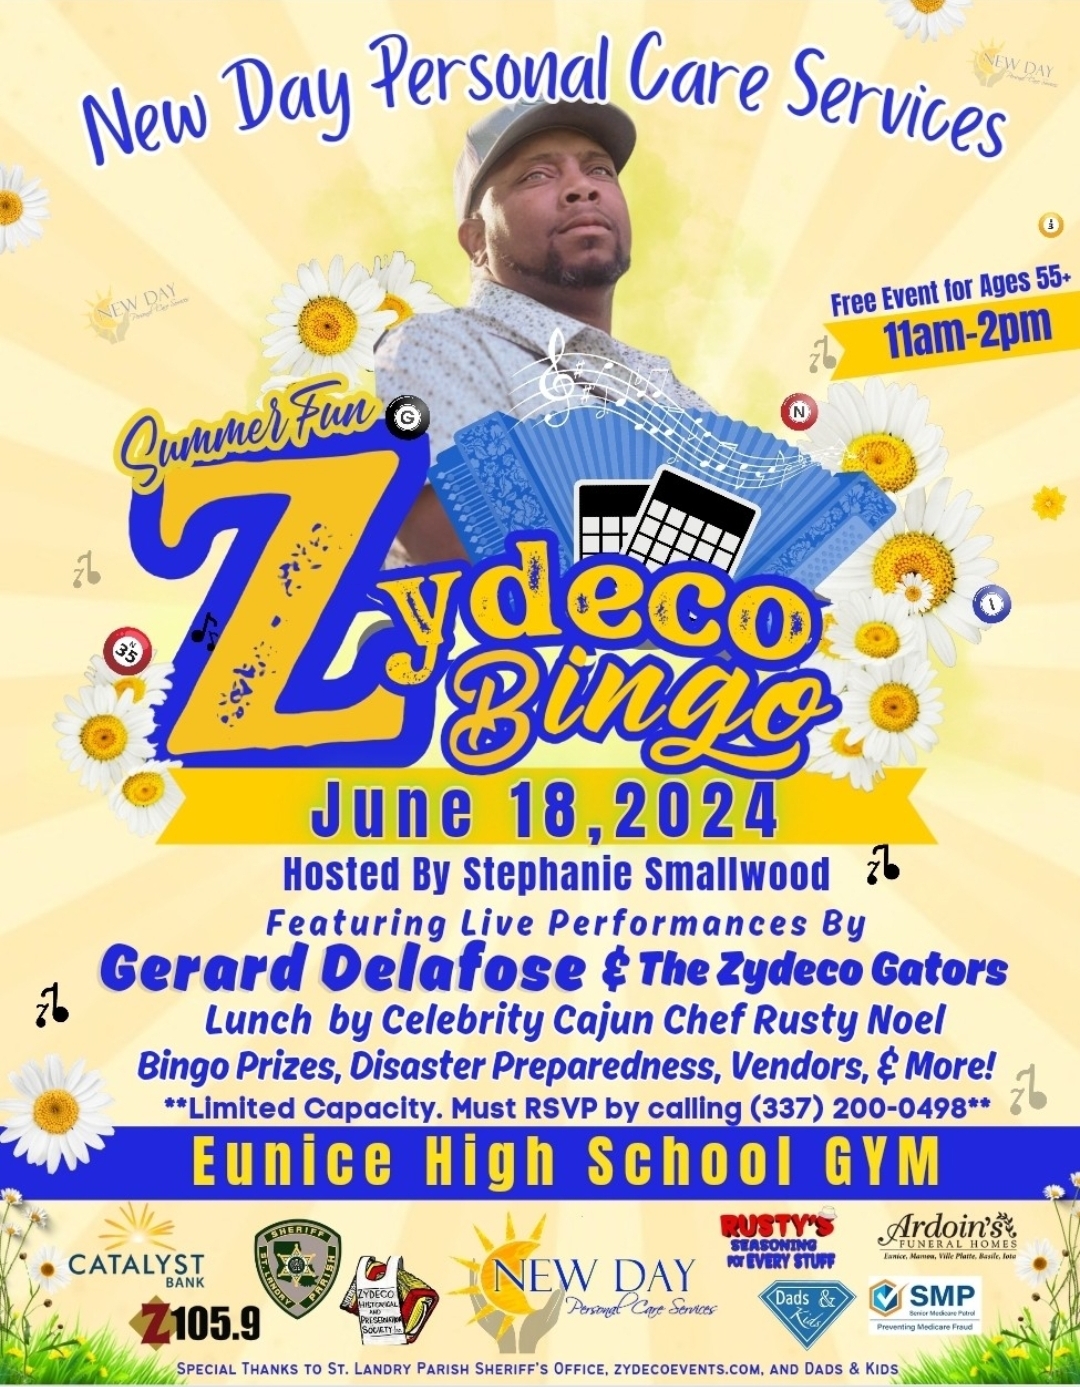 New Day Personal Care Services Presents: Zydeco Bingo (Eunice)